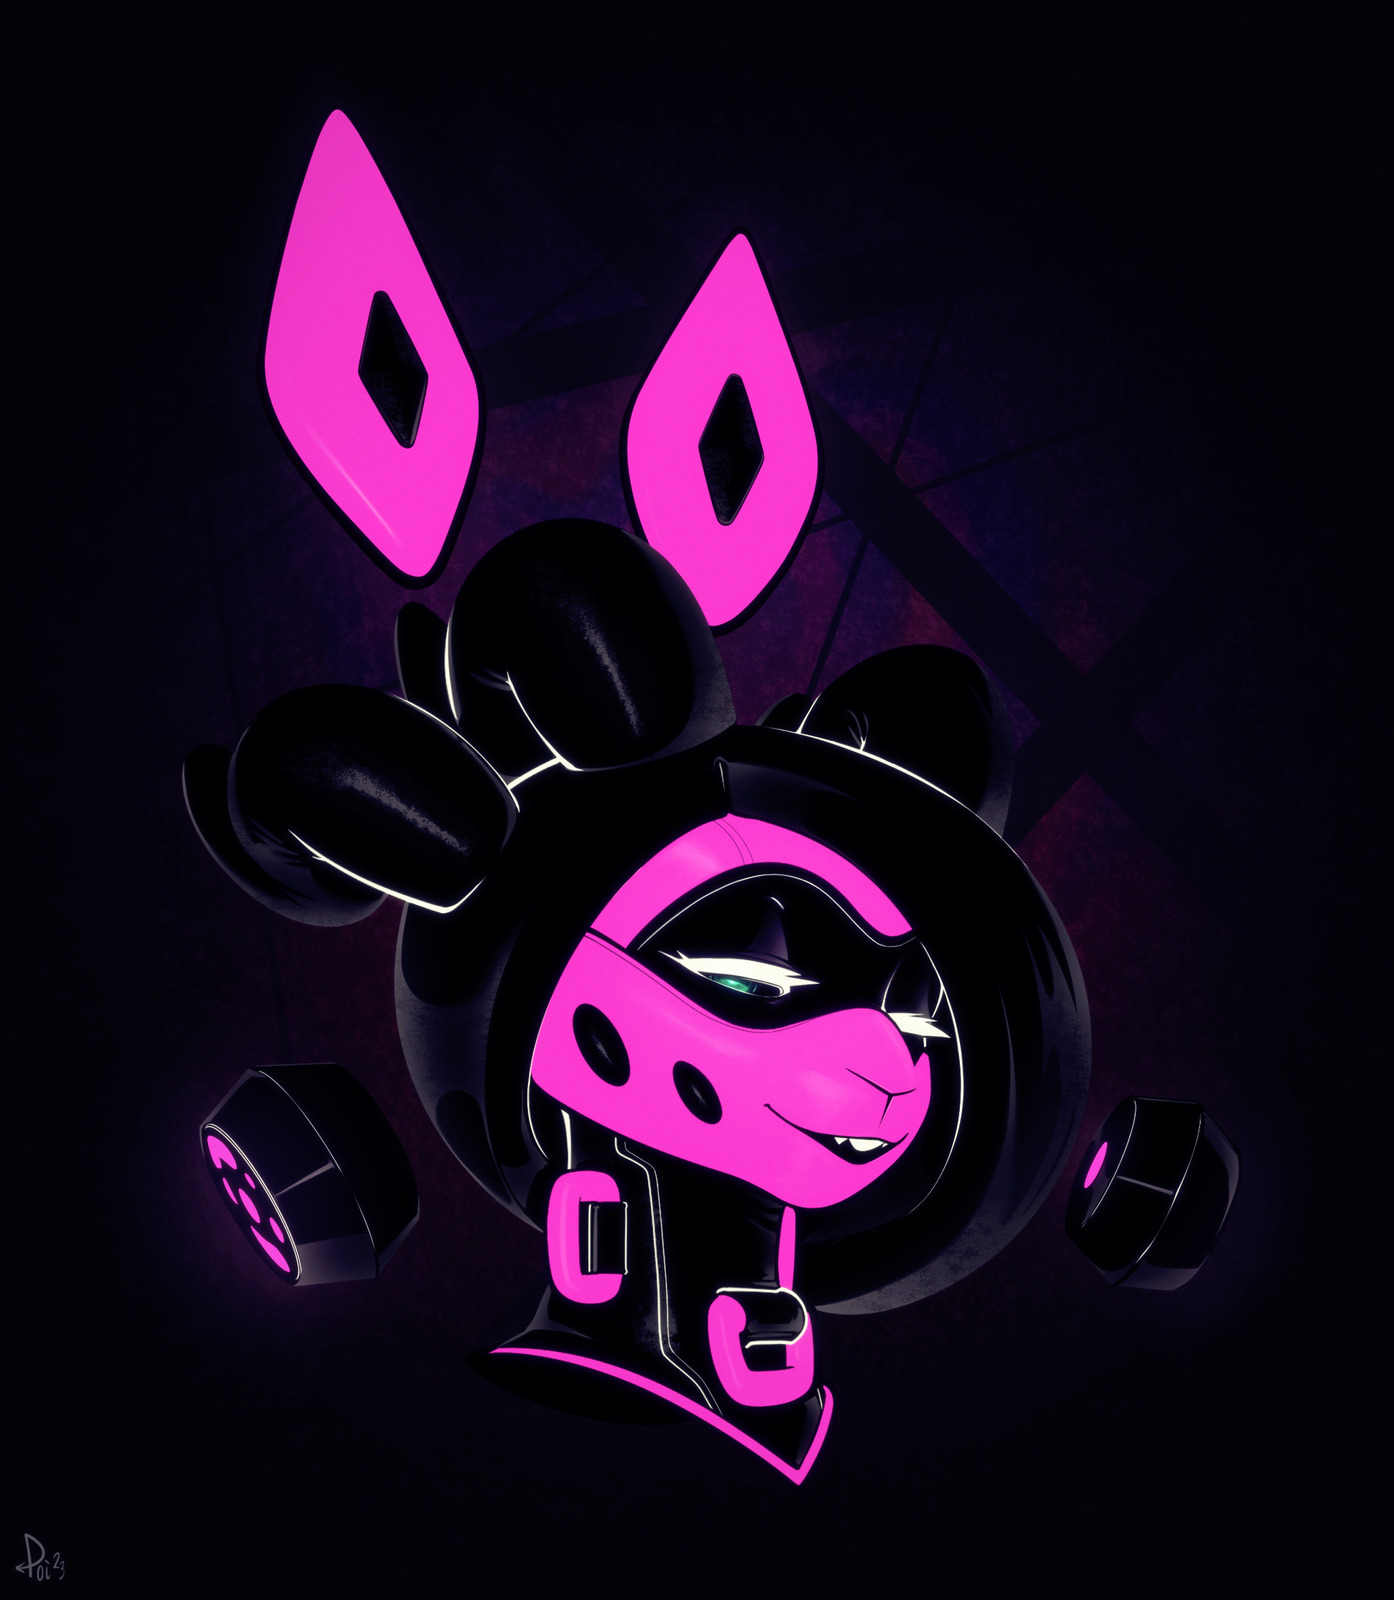 A demon-themed rubber anthro gasmask bunny creature, pink and black in coloration save for a small glimpse of teal eye. Their ears float above their head slightly behind them, and the gasmask filters float to either side of them.